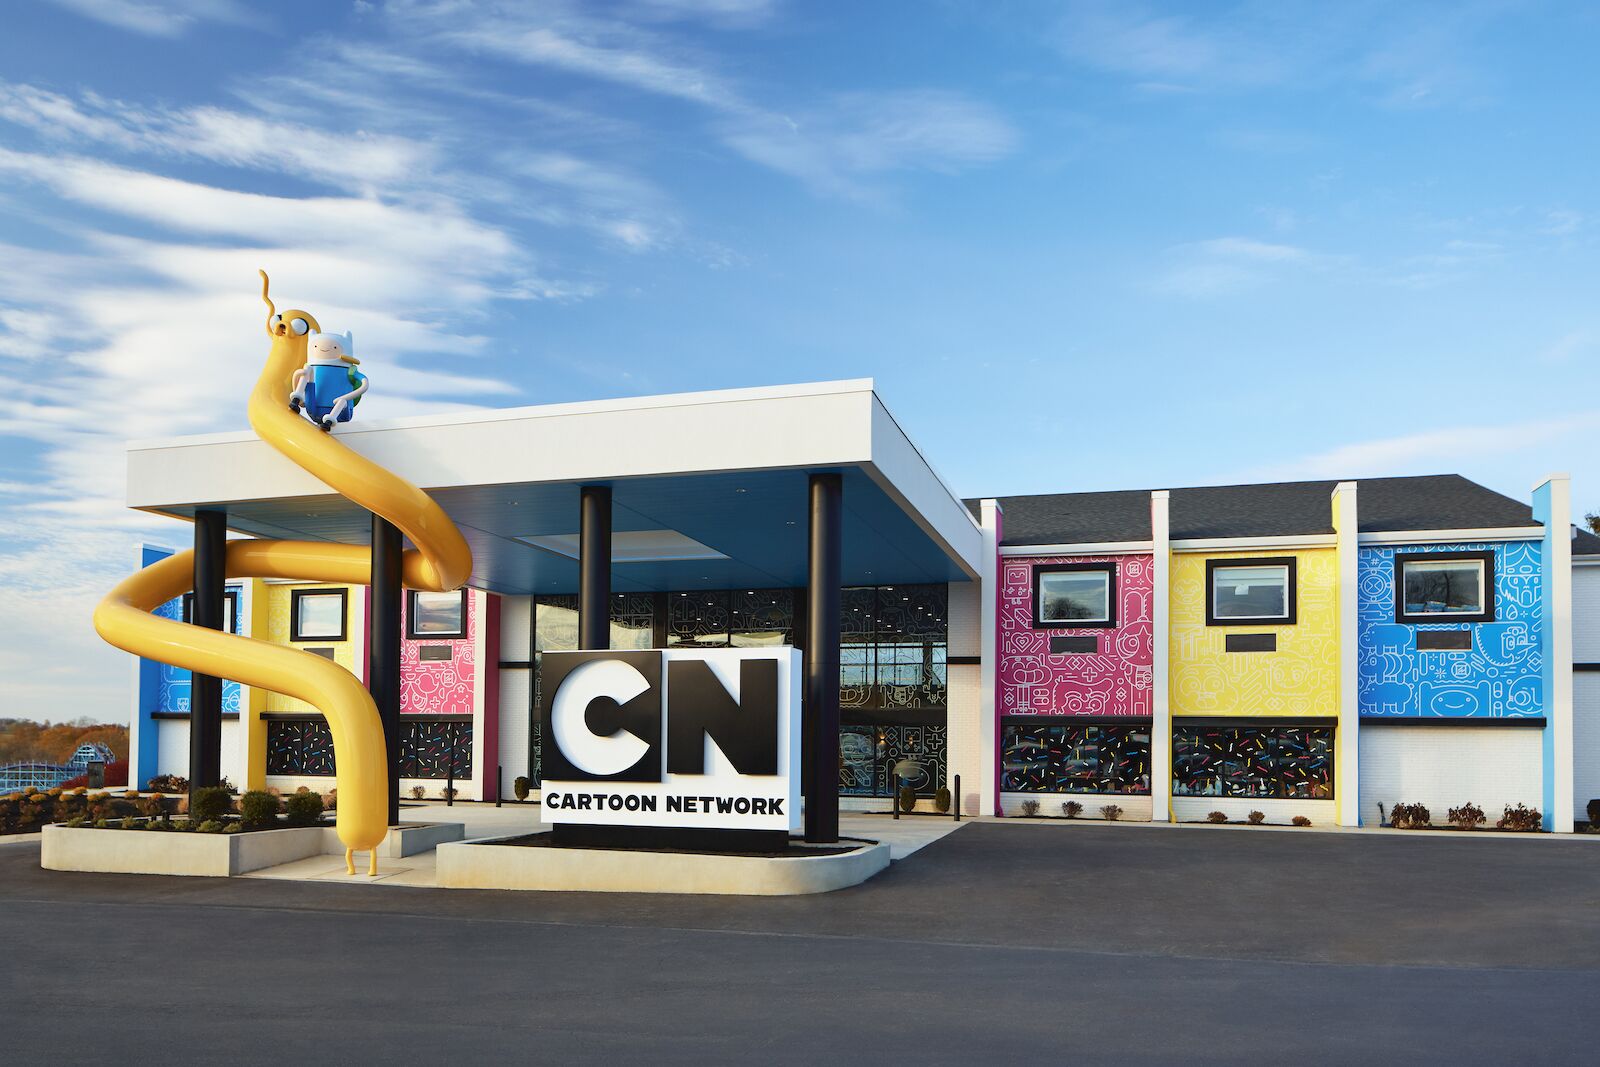 Facade of the Cartoon Network Hotel in Lancaster, PA